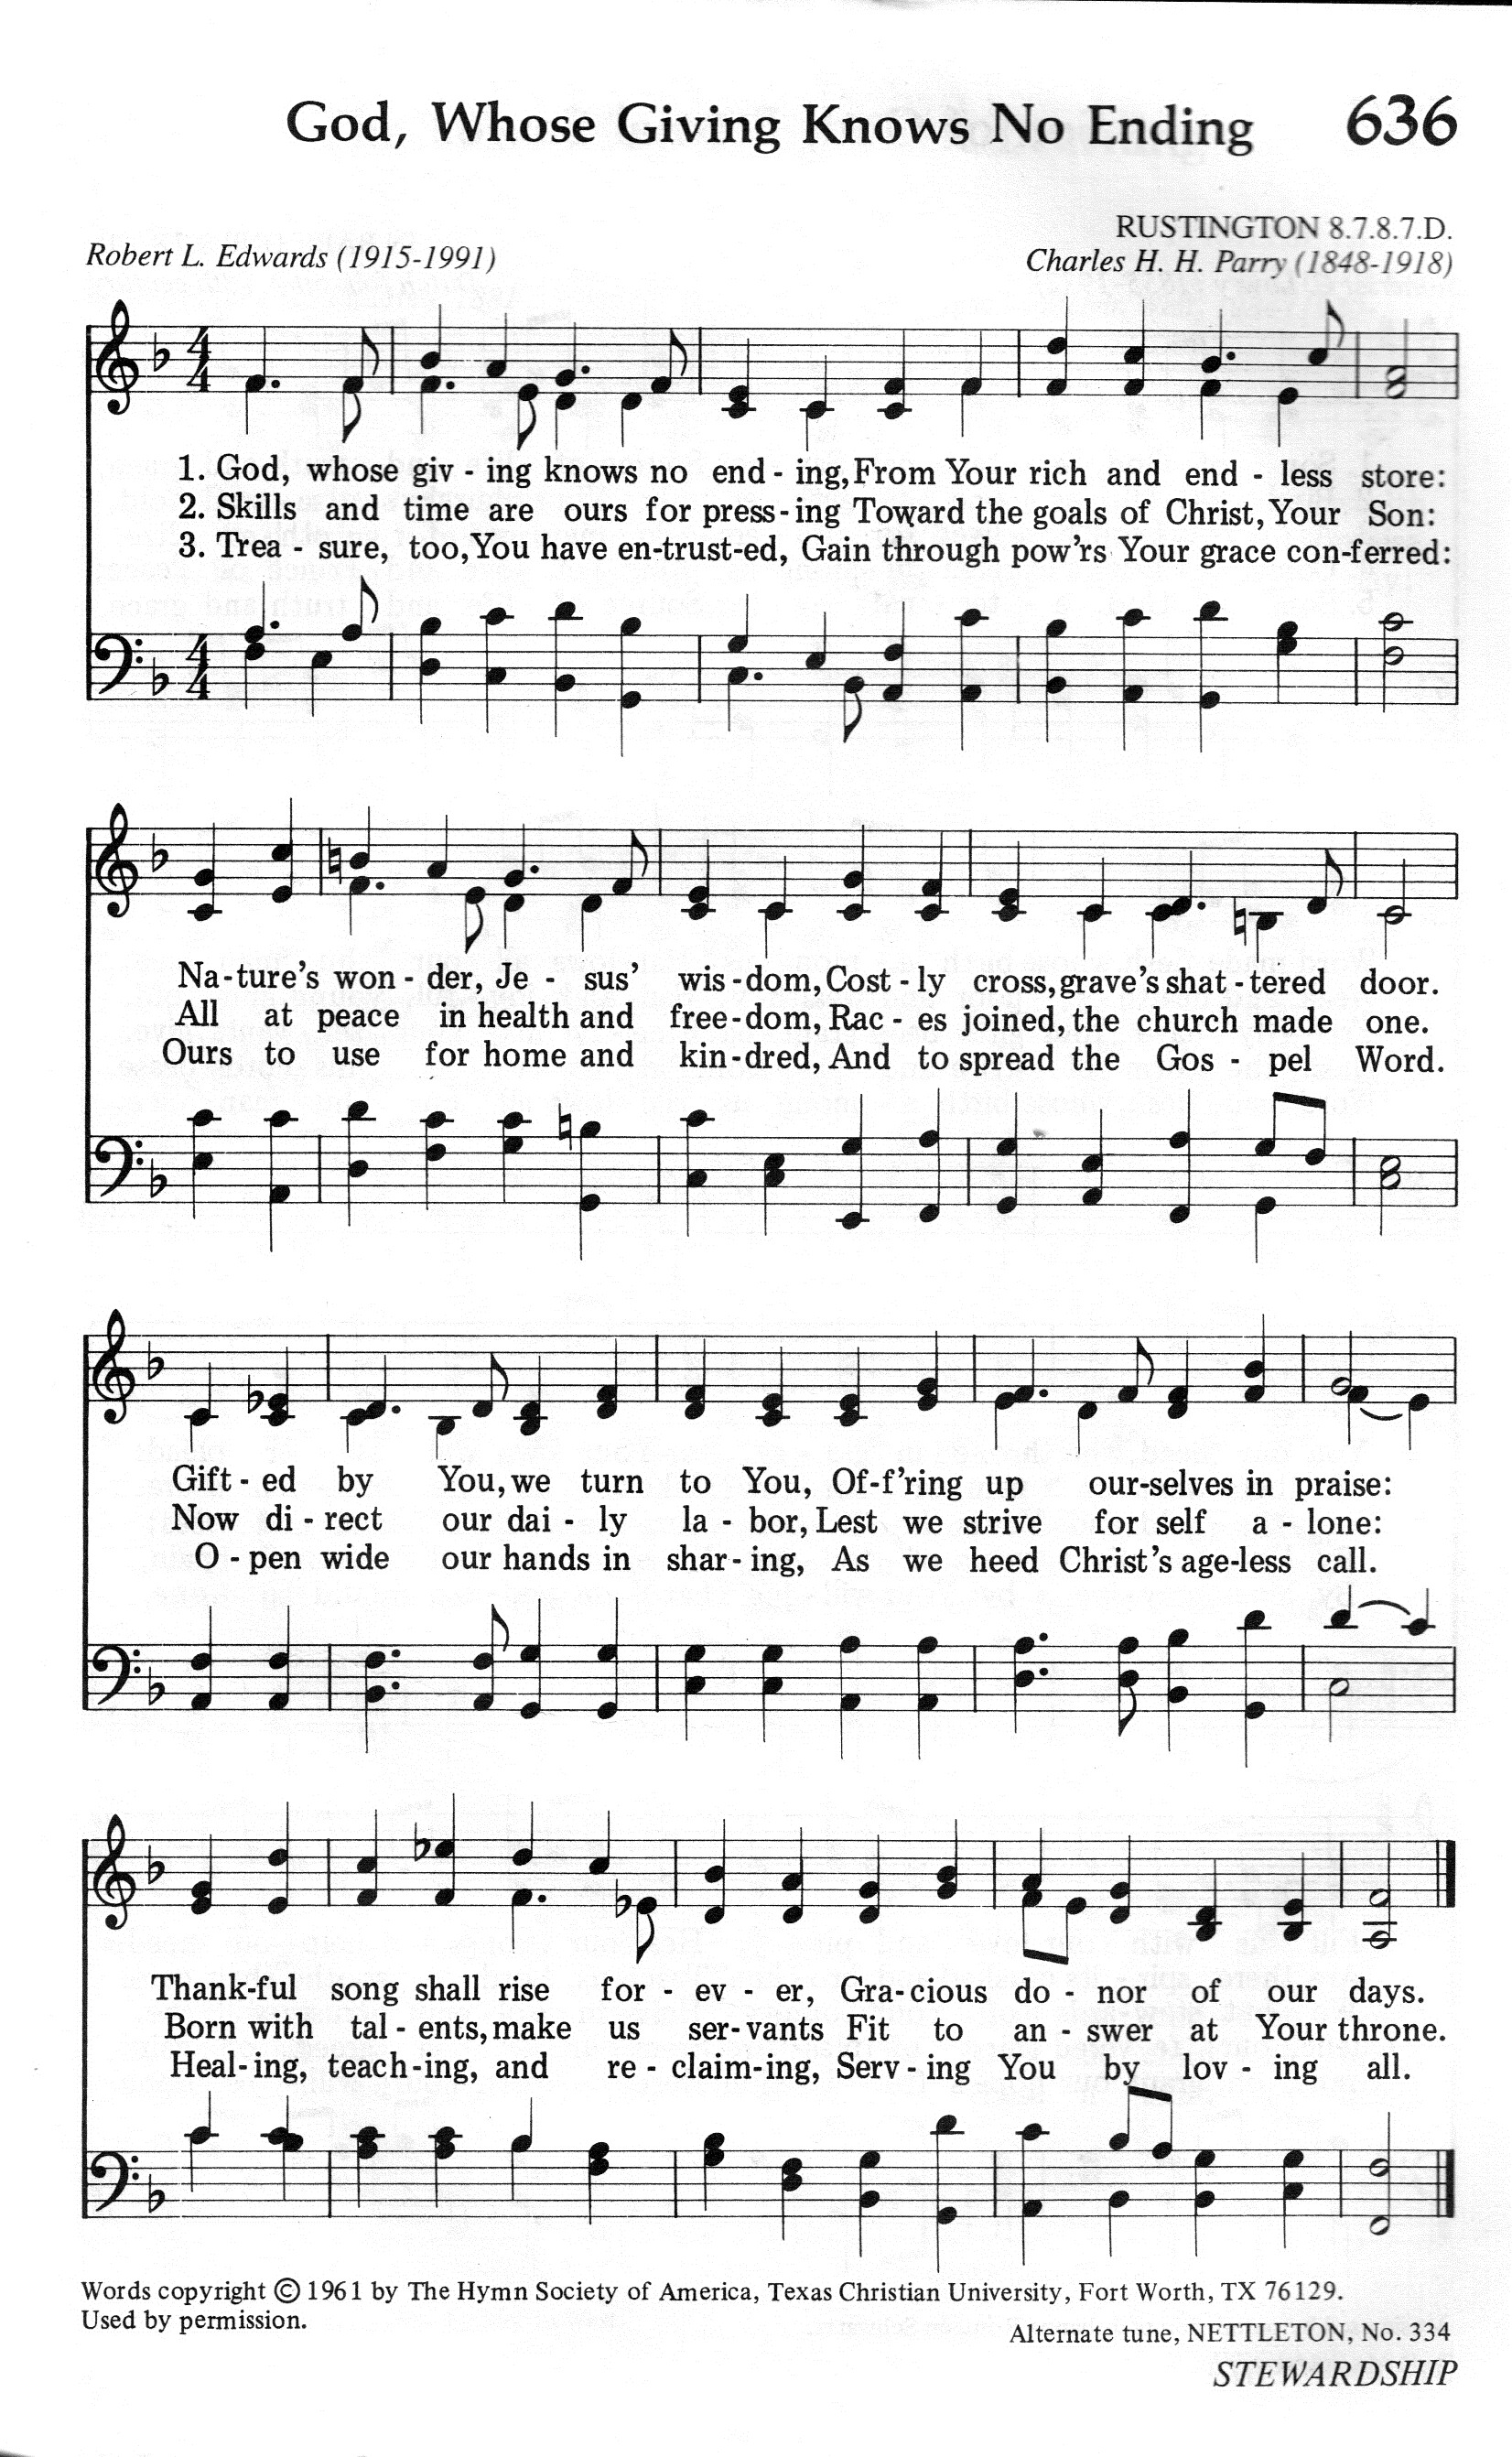 636.God, Whose Giving Knows No Ending-695HYMN